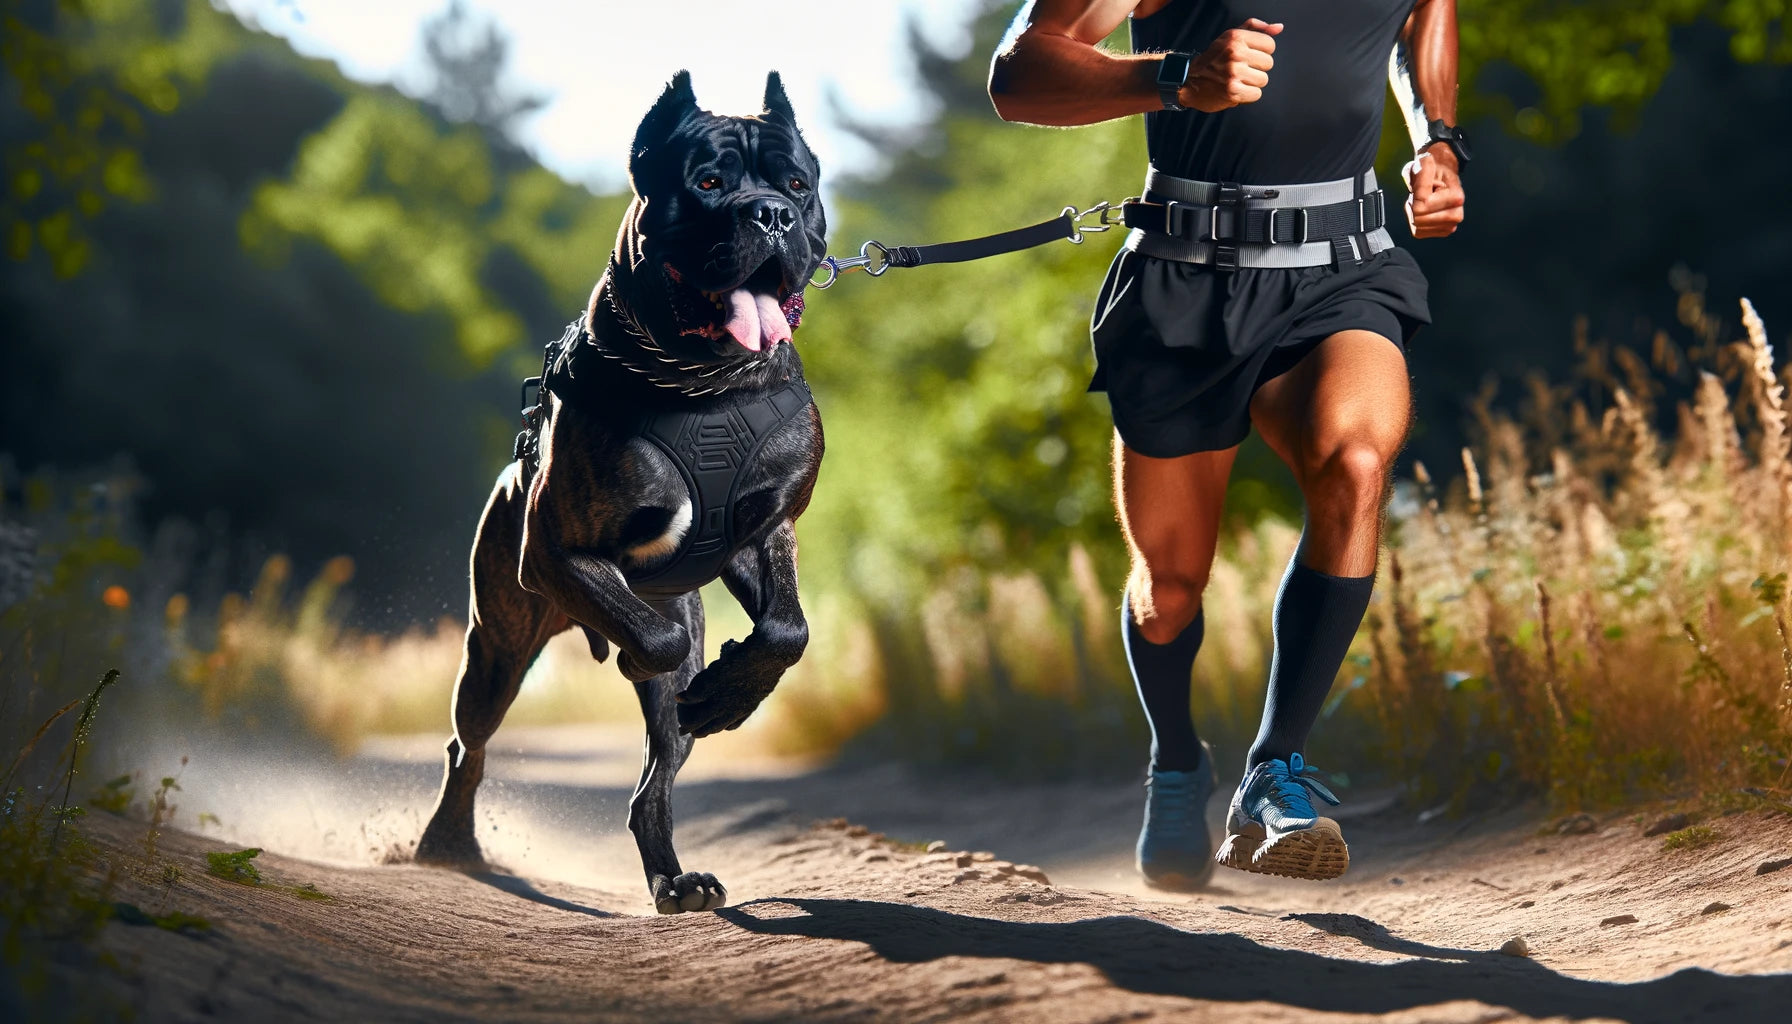 Cane Corso participating in Canicross, where the dog is harnessed and running alongside its owner.